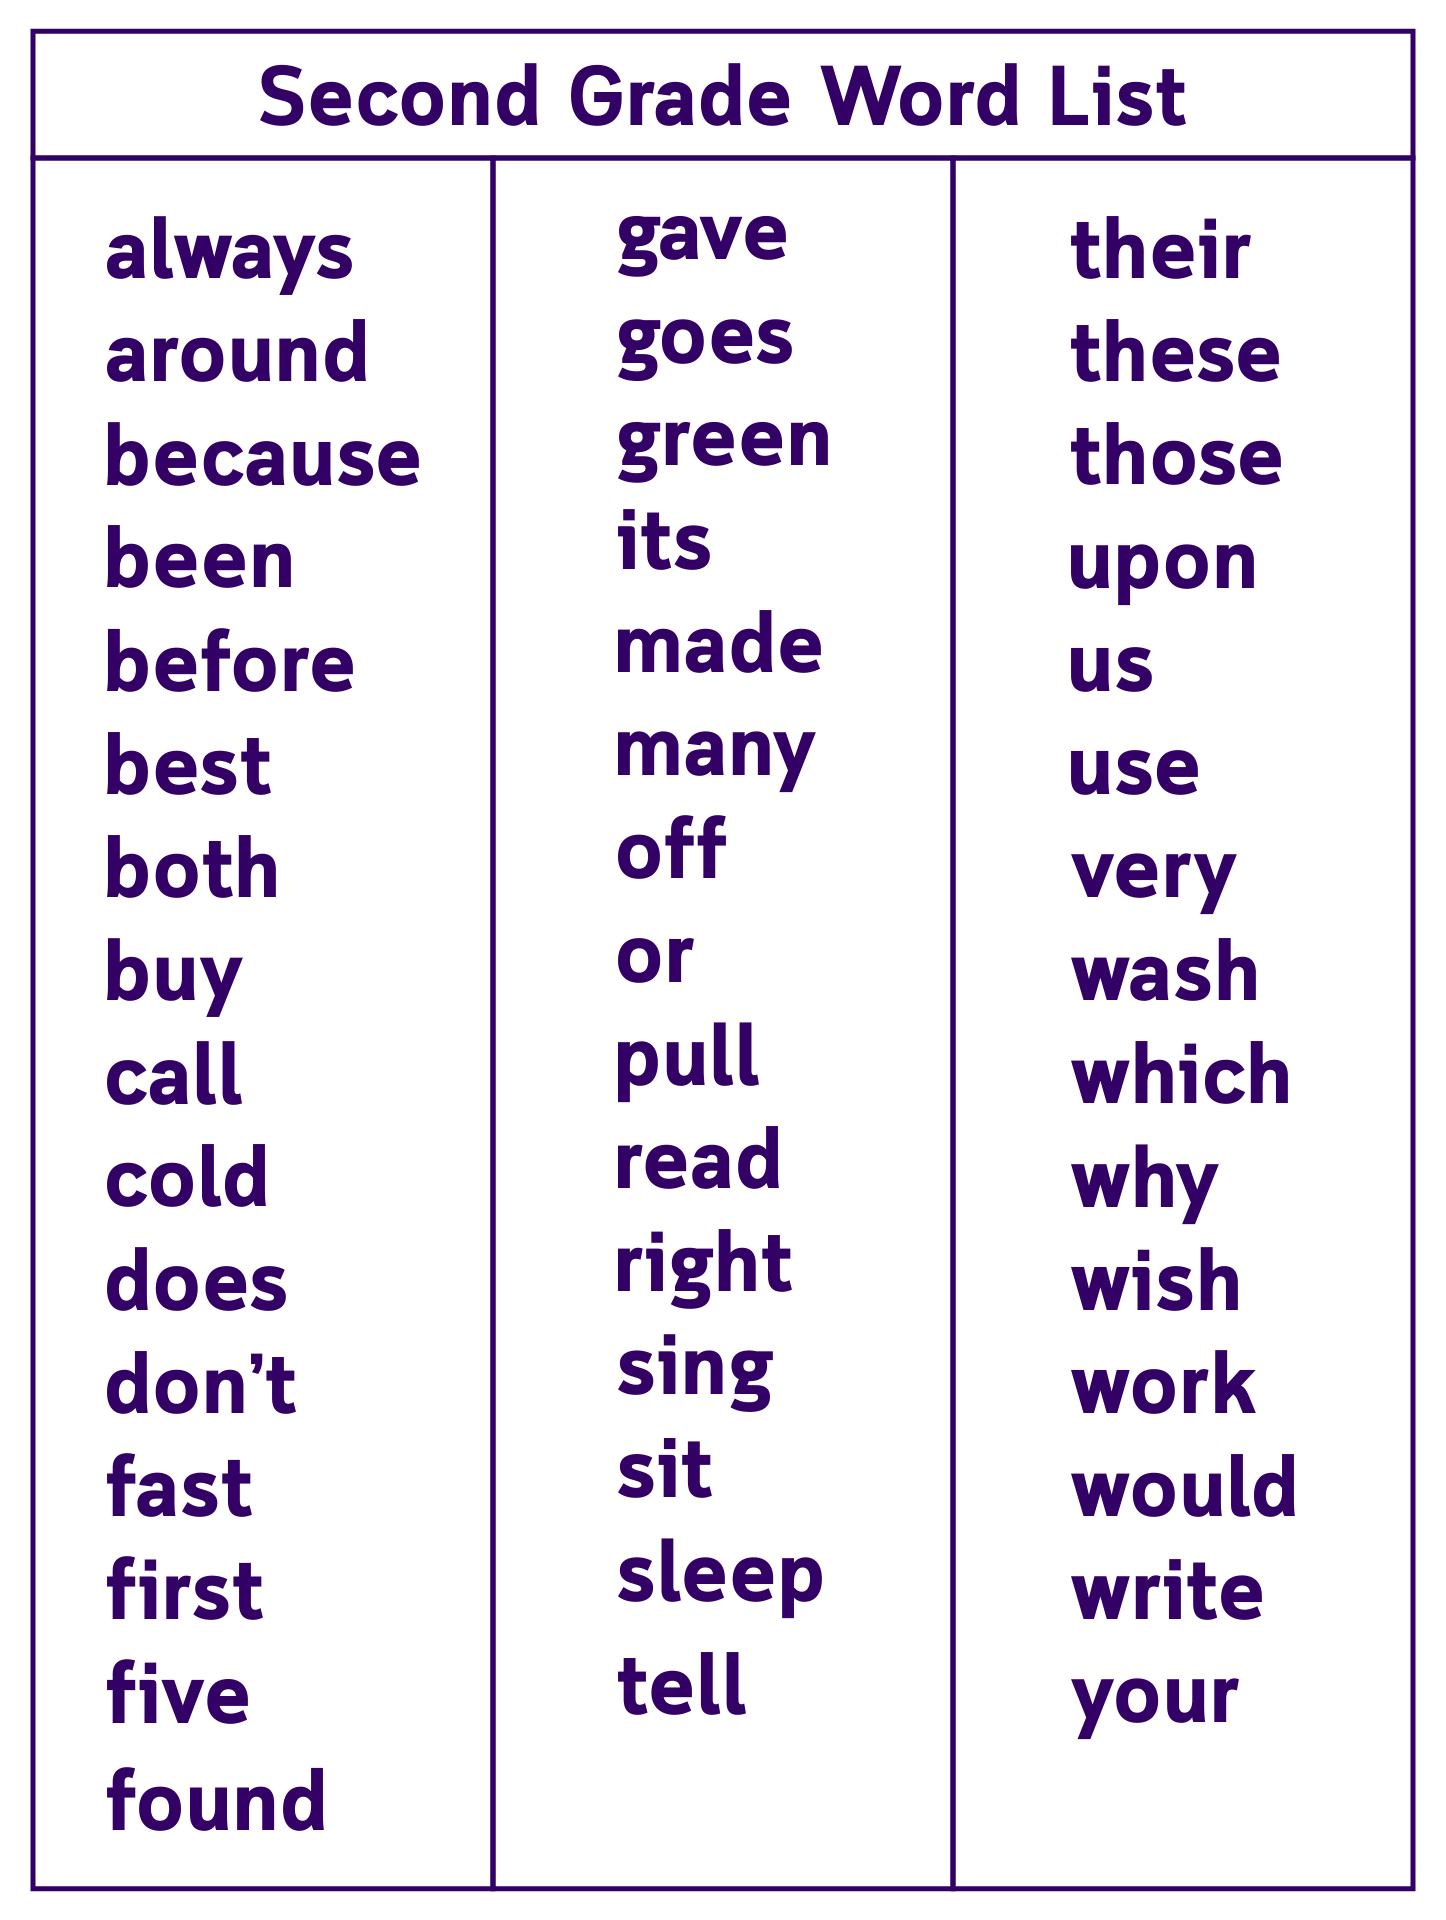 22 Best Second Grade Sight Words Printable - printablee.com Inside 2nd Grade Sight Words Worksheet